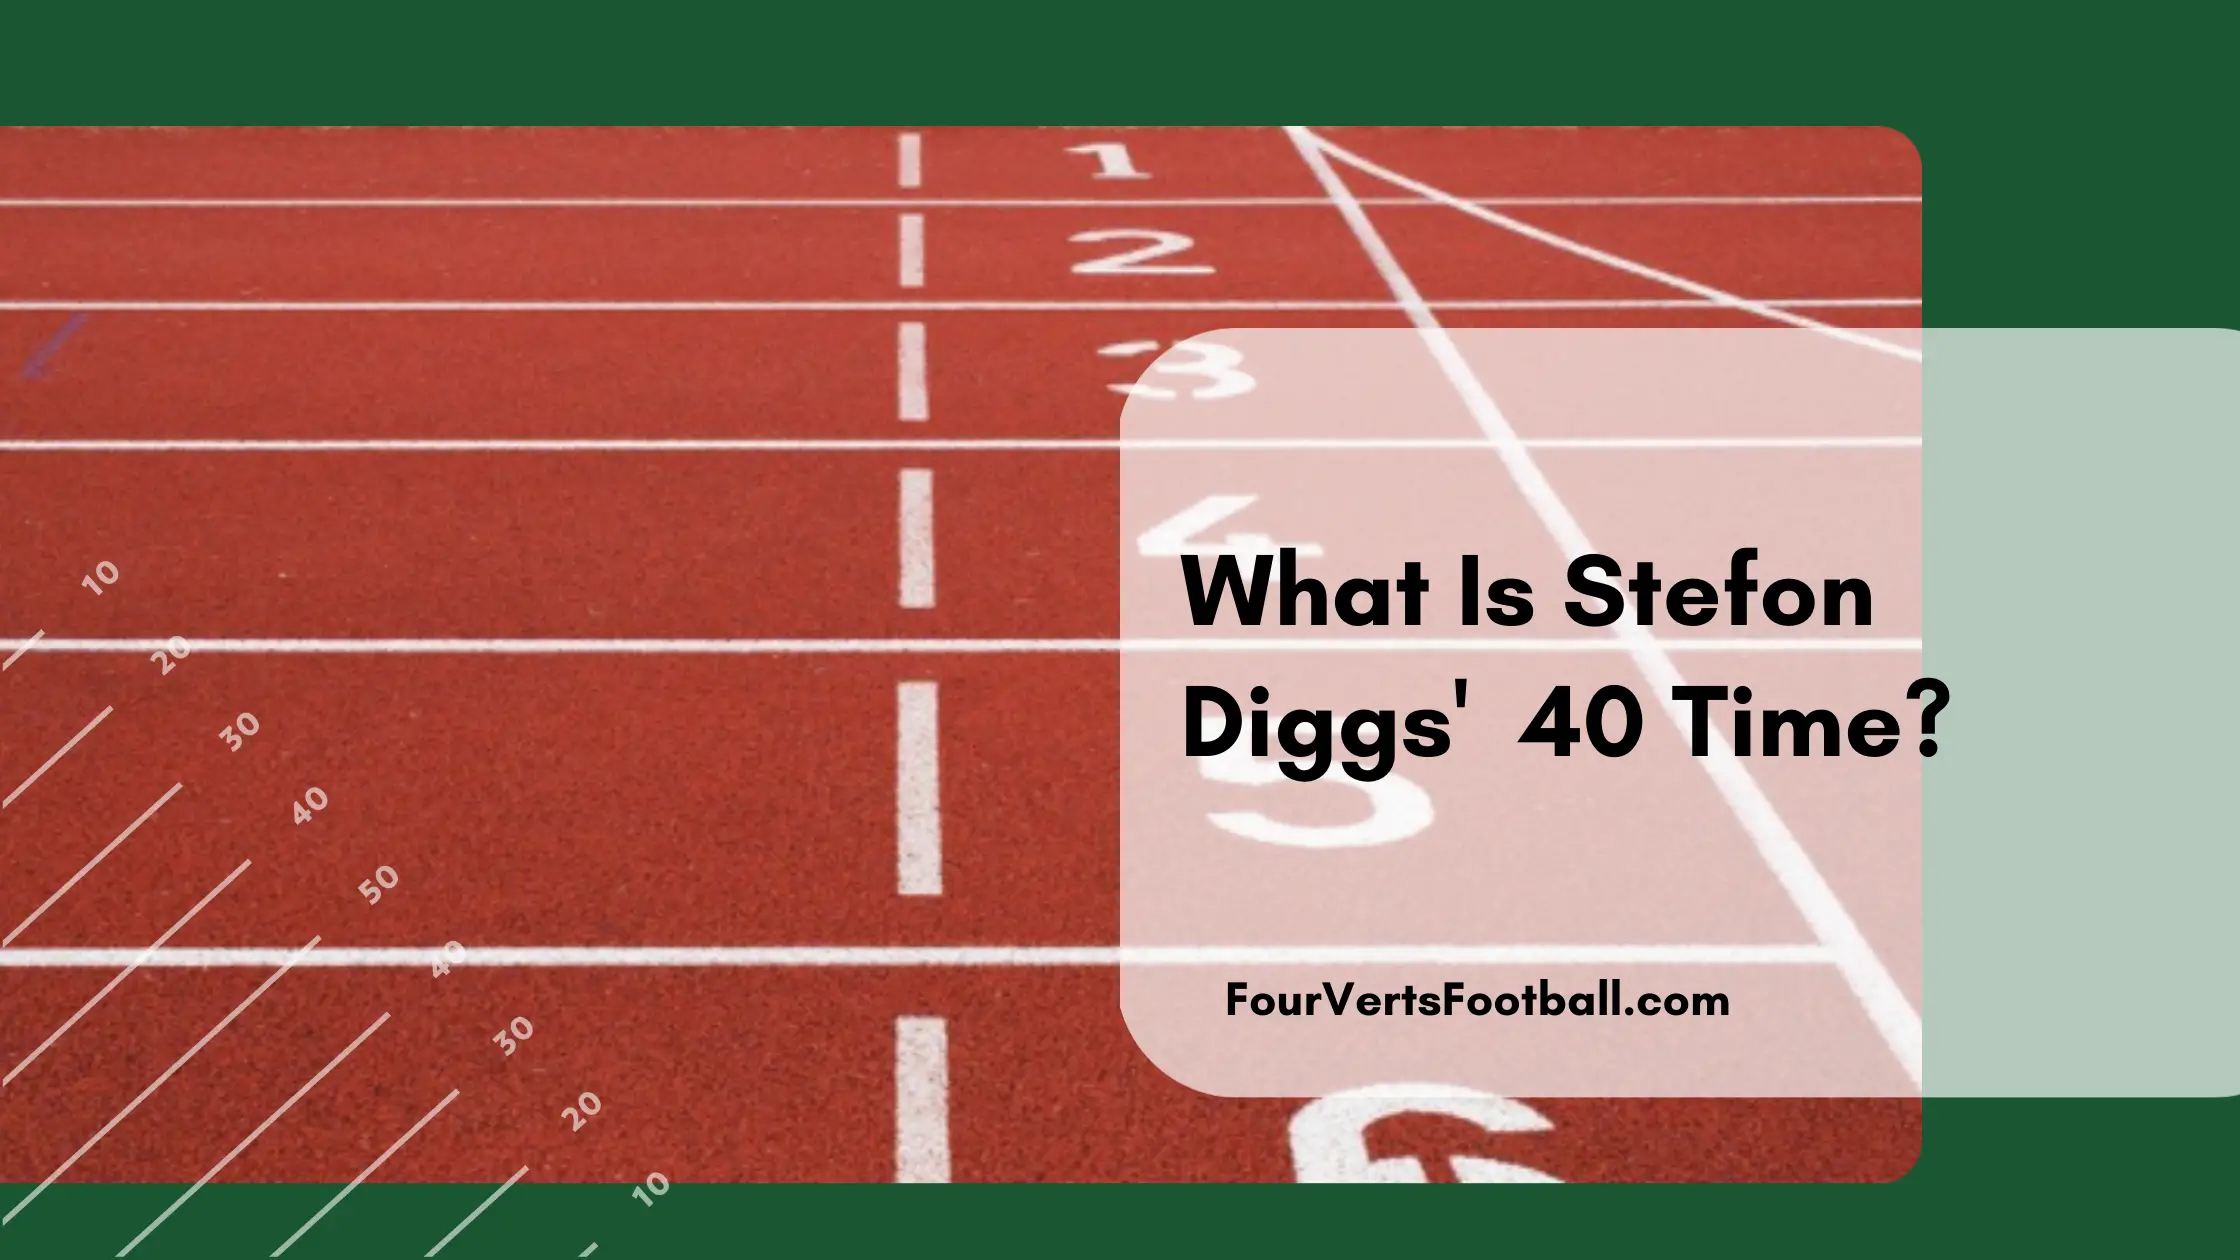 Stefon Diggs' 40 time